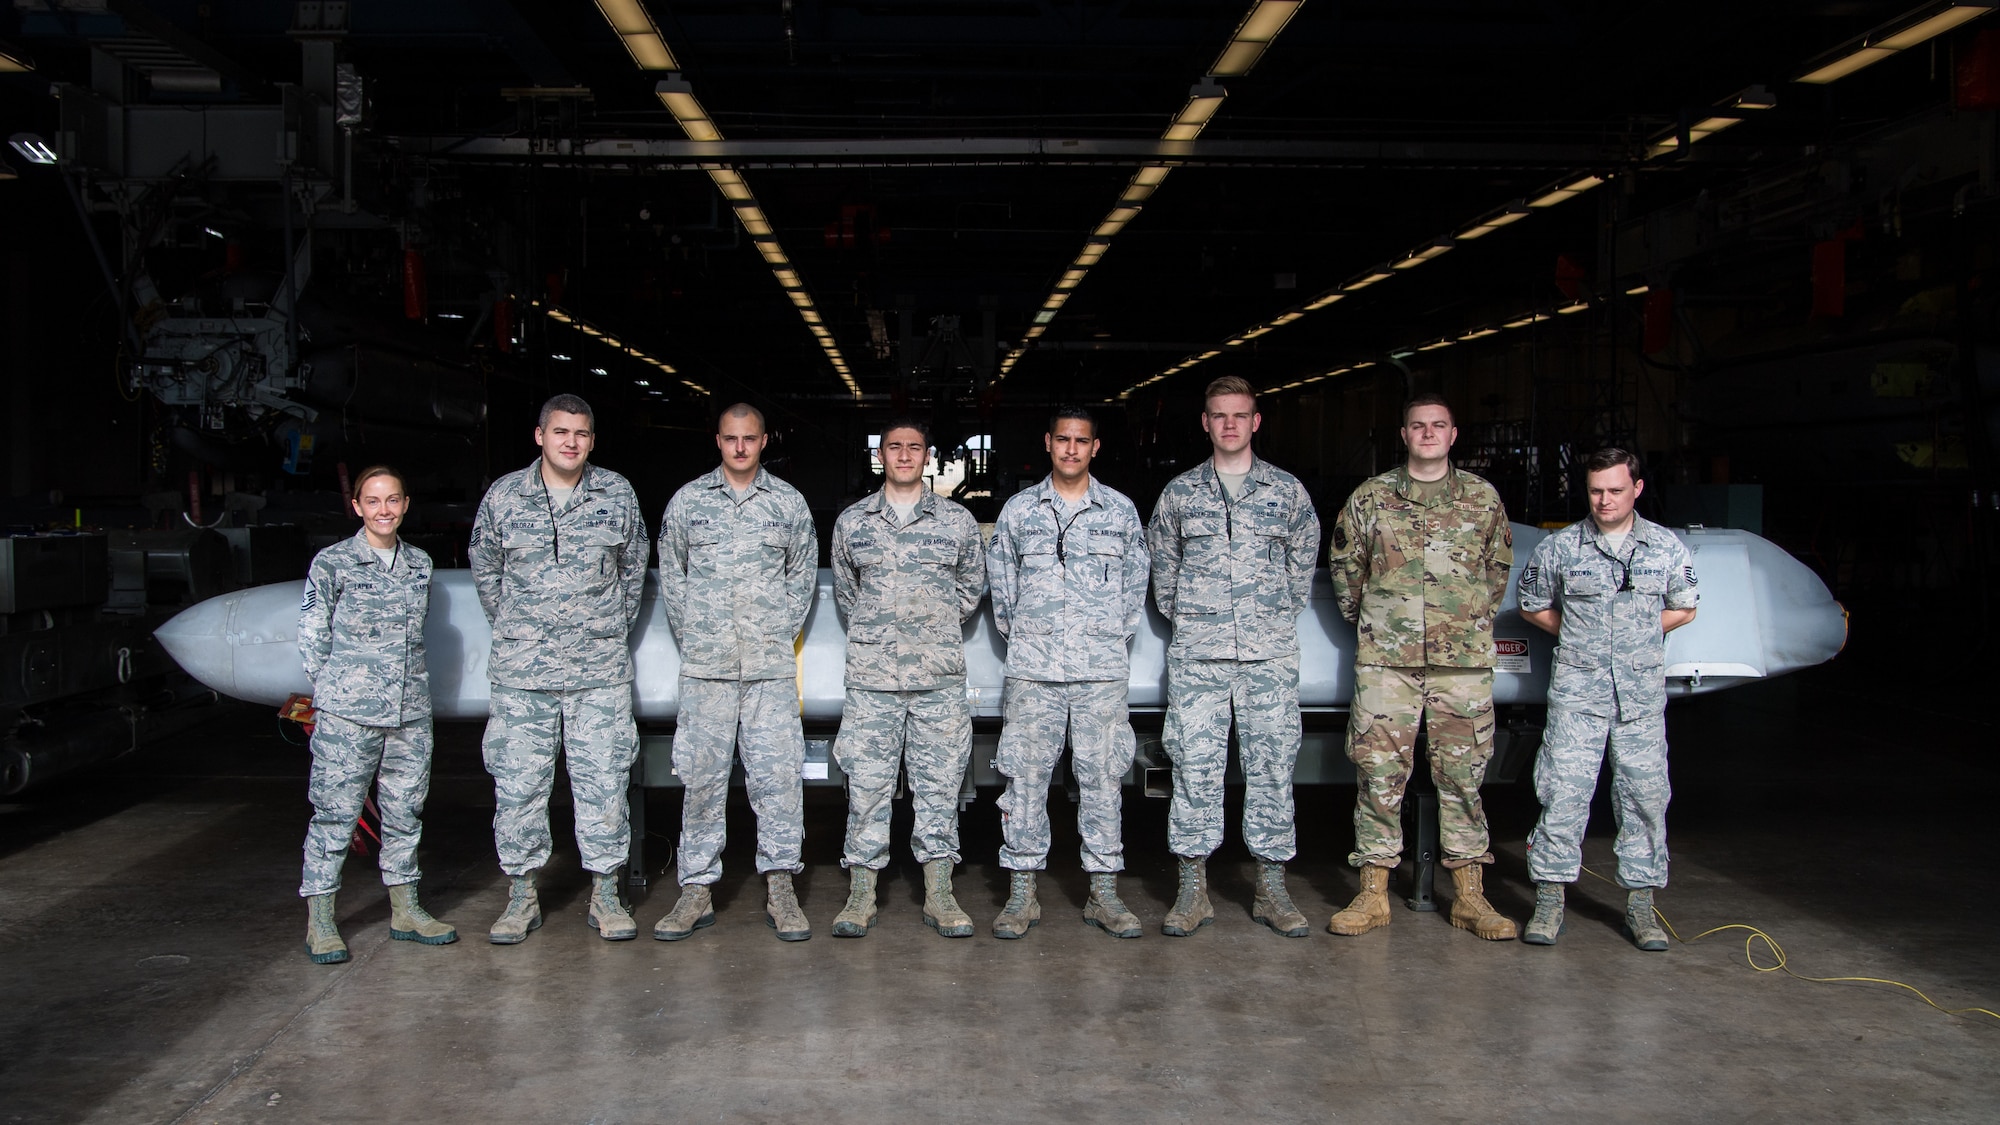 Airmen from the 2nd Munitions Squadron pose for a photo in front of the final Conventional Air-Launched Cruise Missile (CALCM) at Barksdale Air Force Base, La., Nov. 20, 2019. The 2nd MUNS disassembled the final CALCM package for it to become retired and demilitarized. (U.S. Air Force photo by Airman 1st Class Jacob B. Wrightsman)